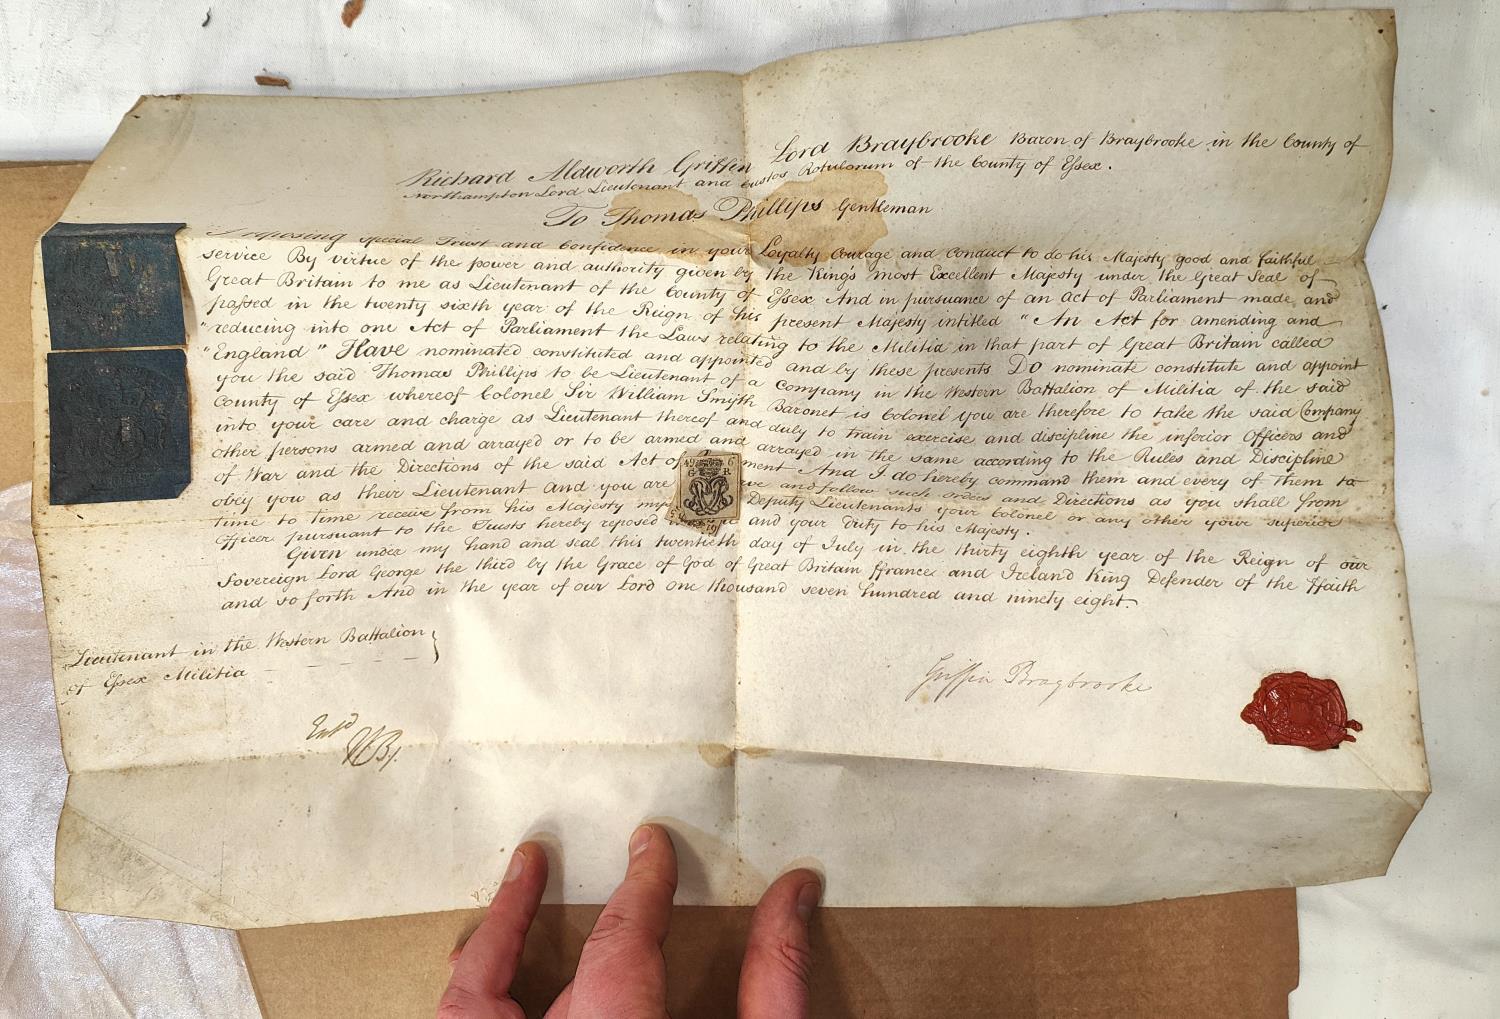 Essex Militia: a commission document dated 1798 signed by Lord Braybrooke